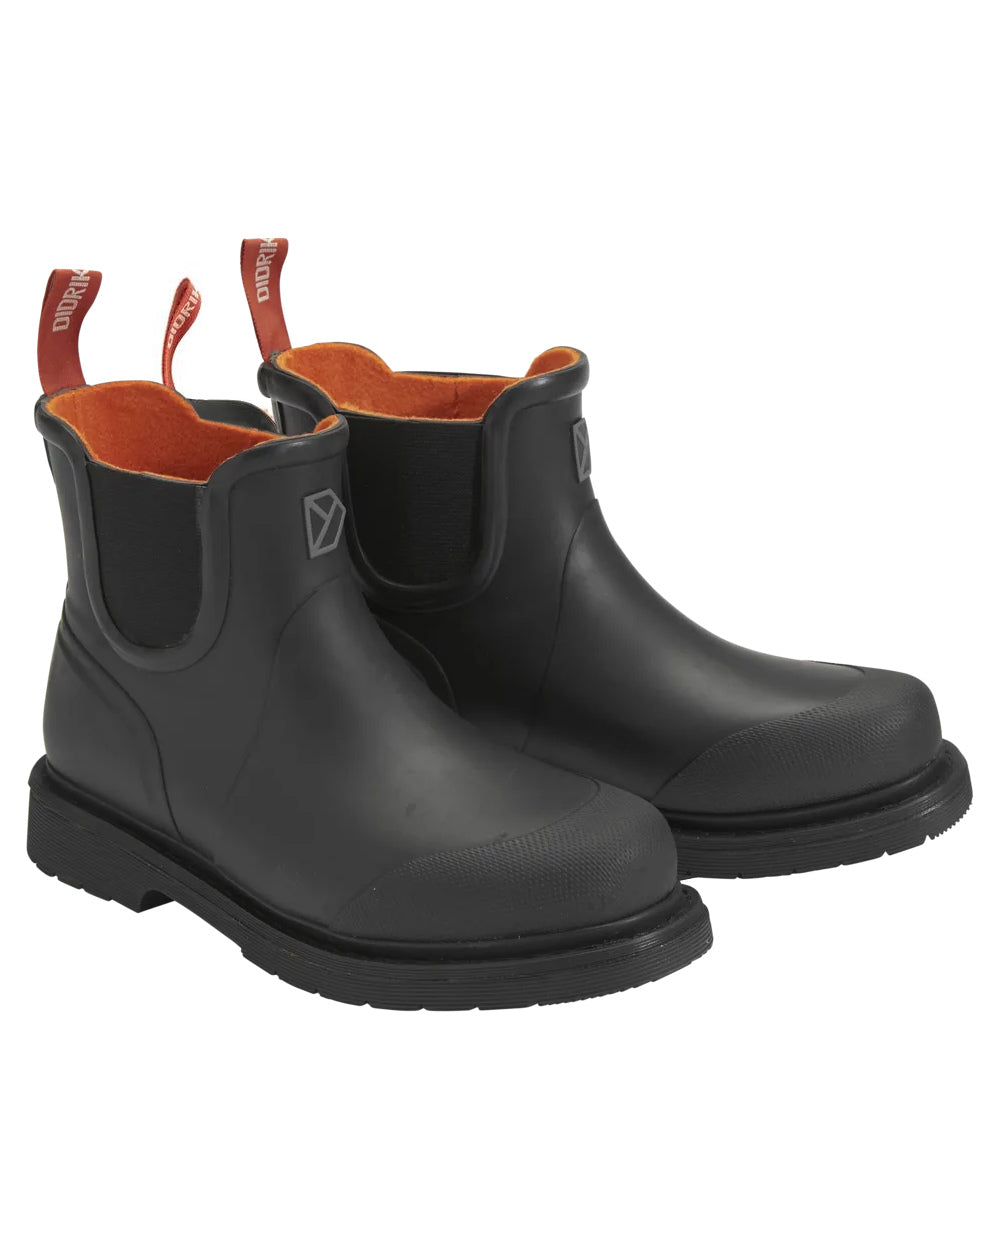 Black Coloured Didriksons Vinga Womens Rubber Boots On A White Background 